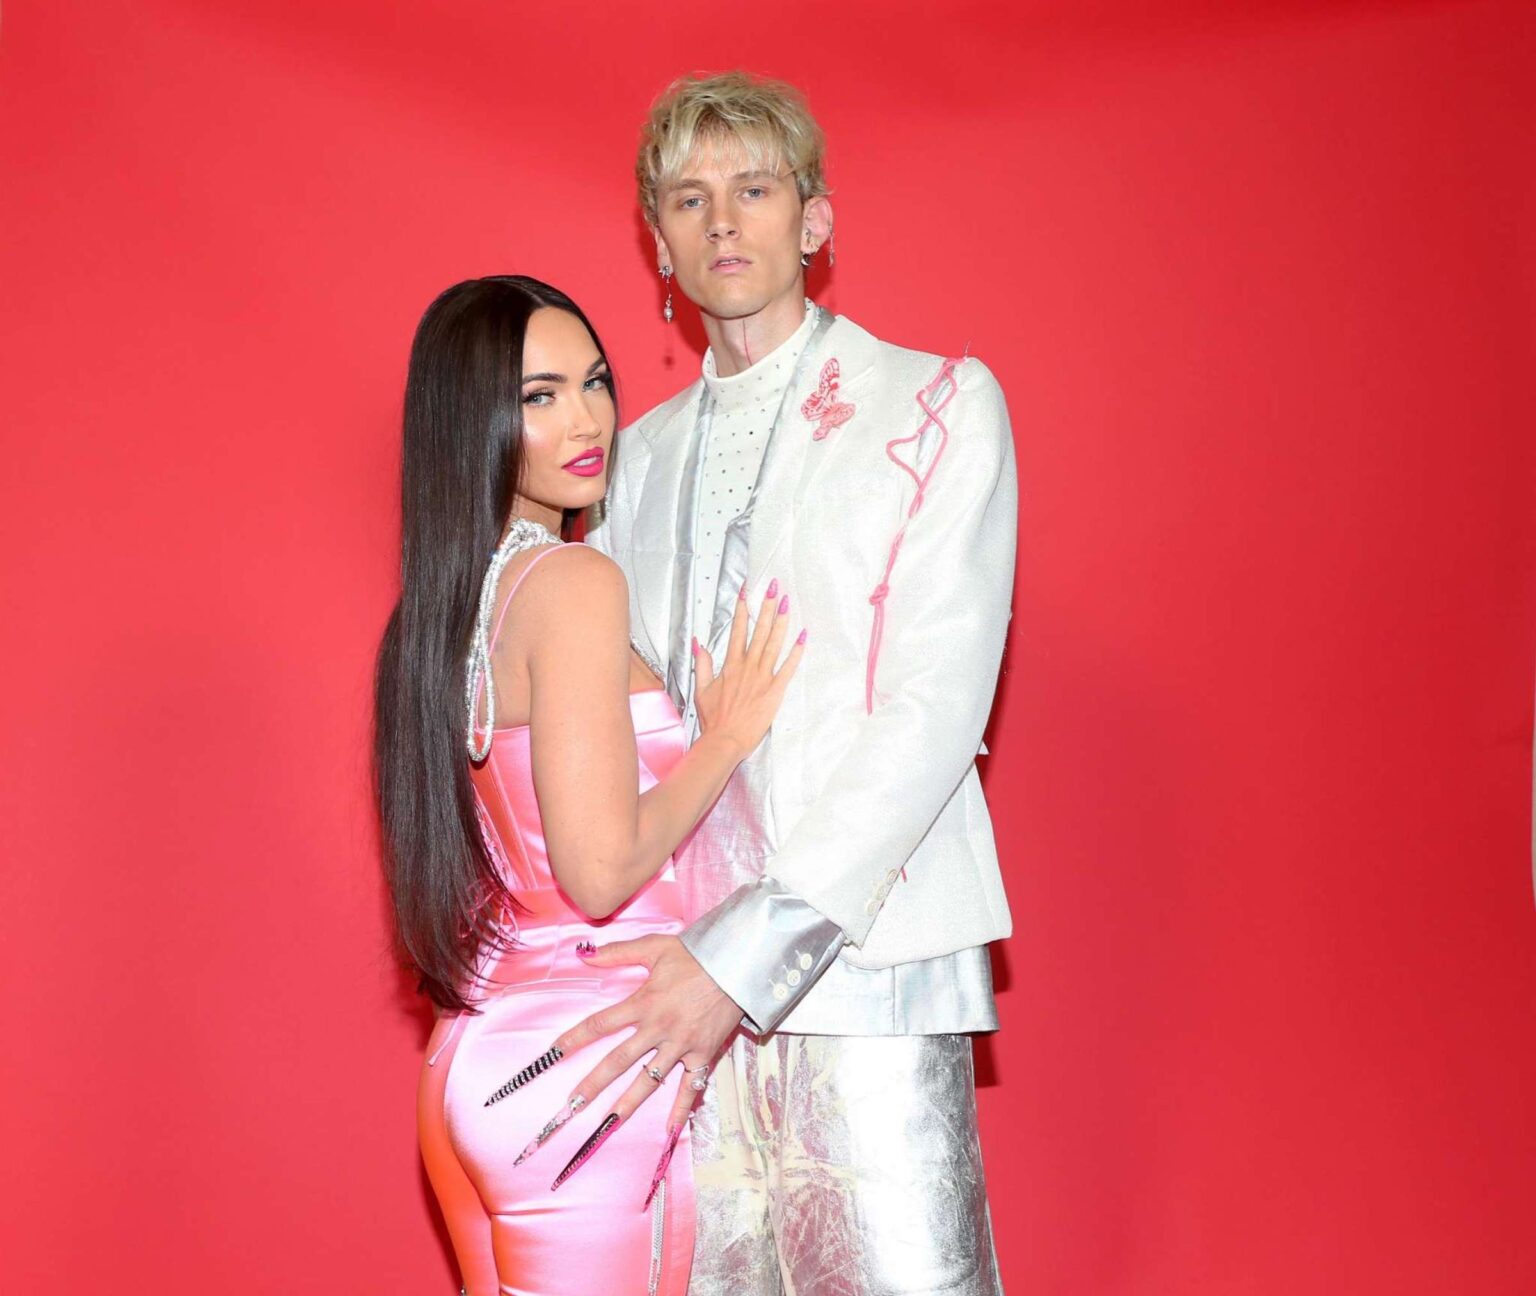 Millions of people have been watching the love story between Machine Gun Kelly & Megan Fox unfold. Could she be pregnant?